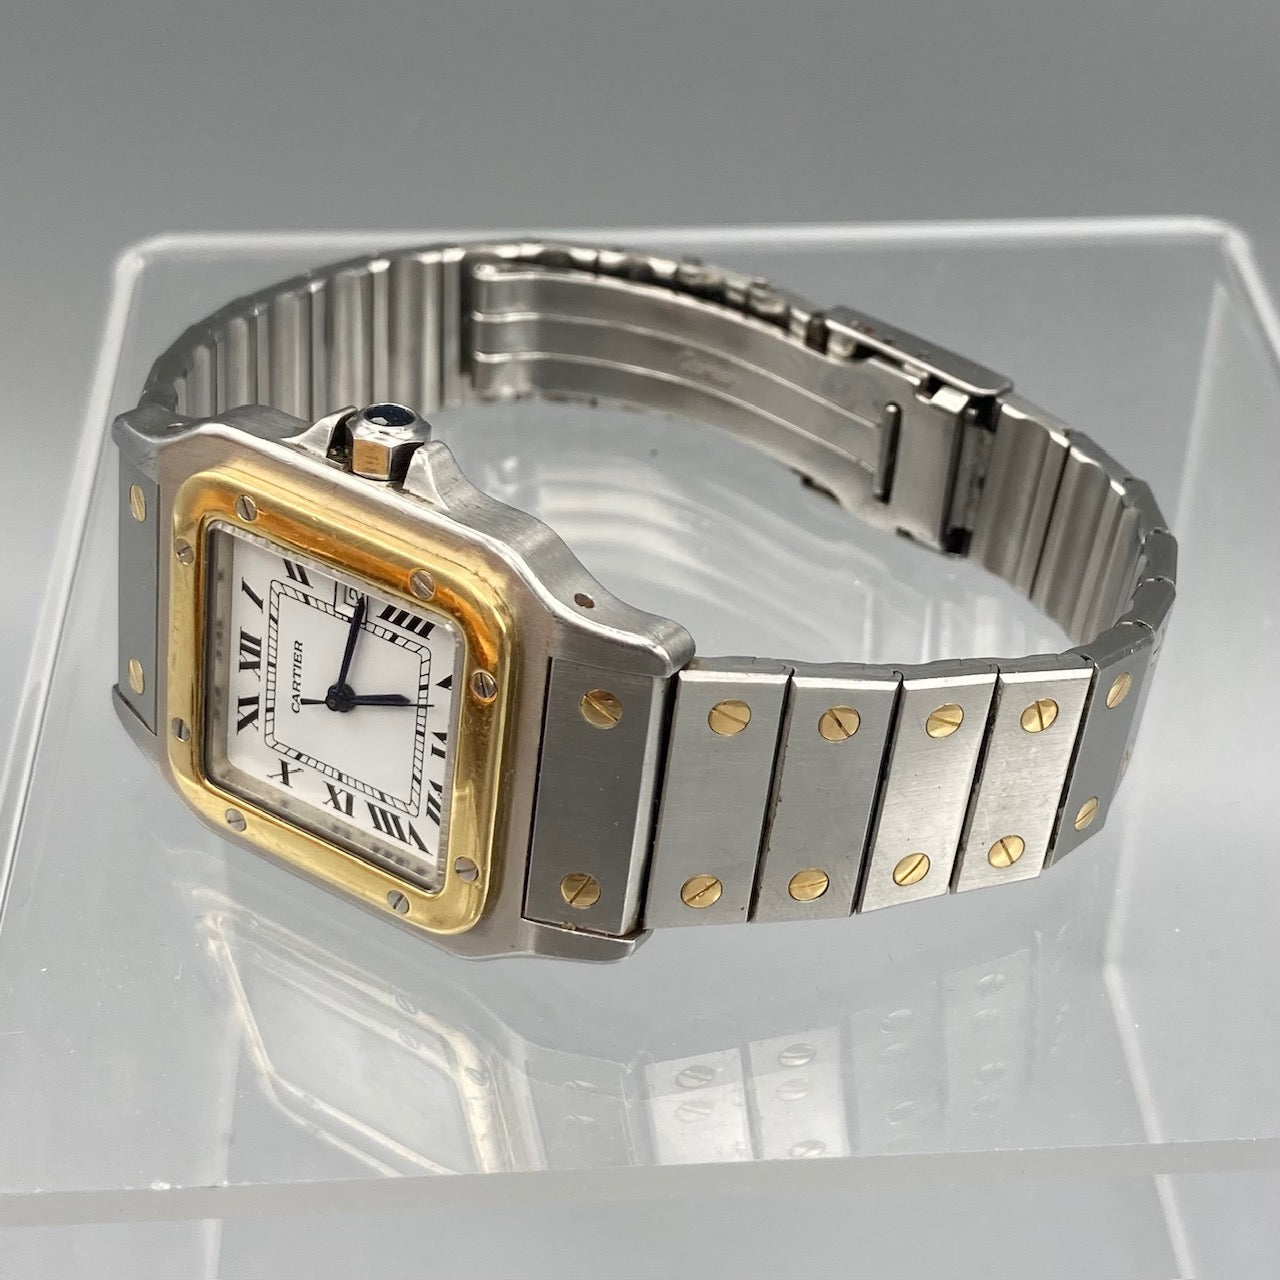 Cartier Santos Automatic Steel and Gold Watch AC 23.80